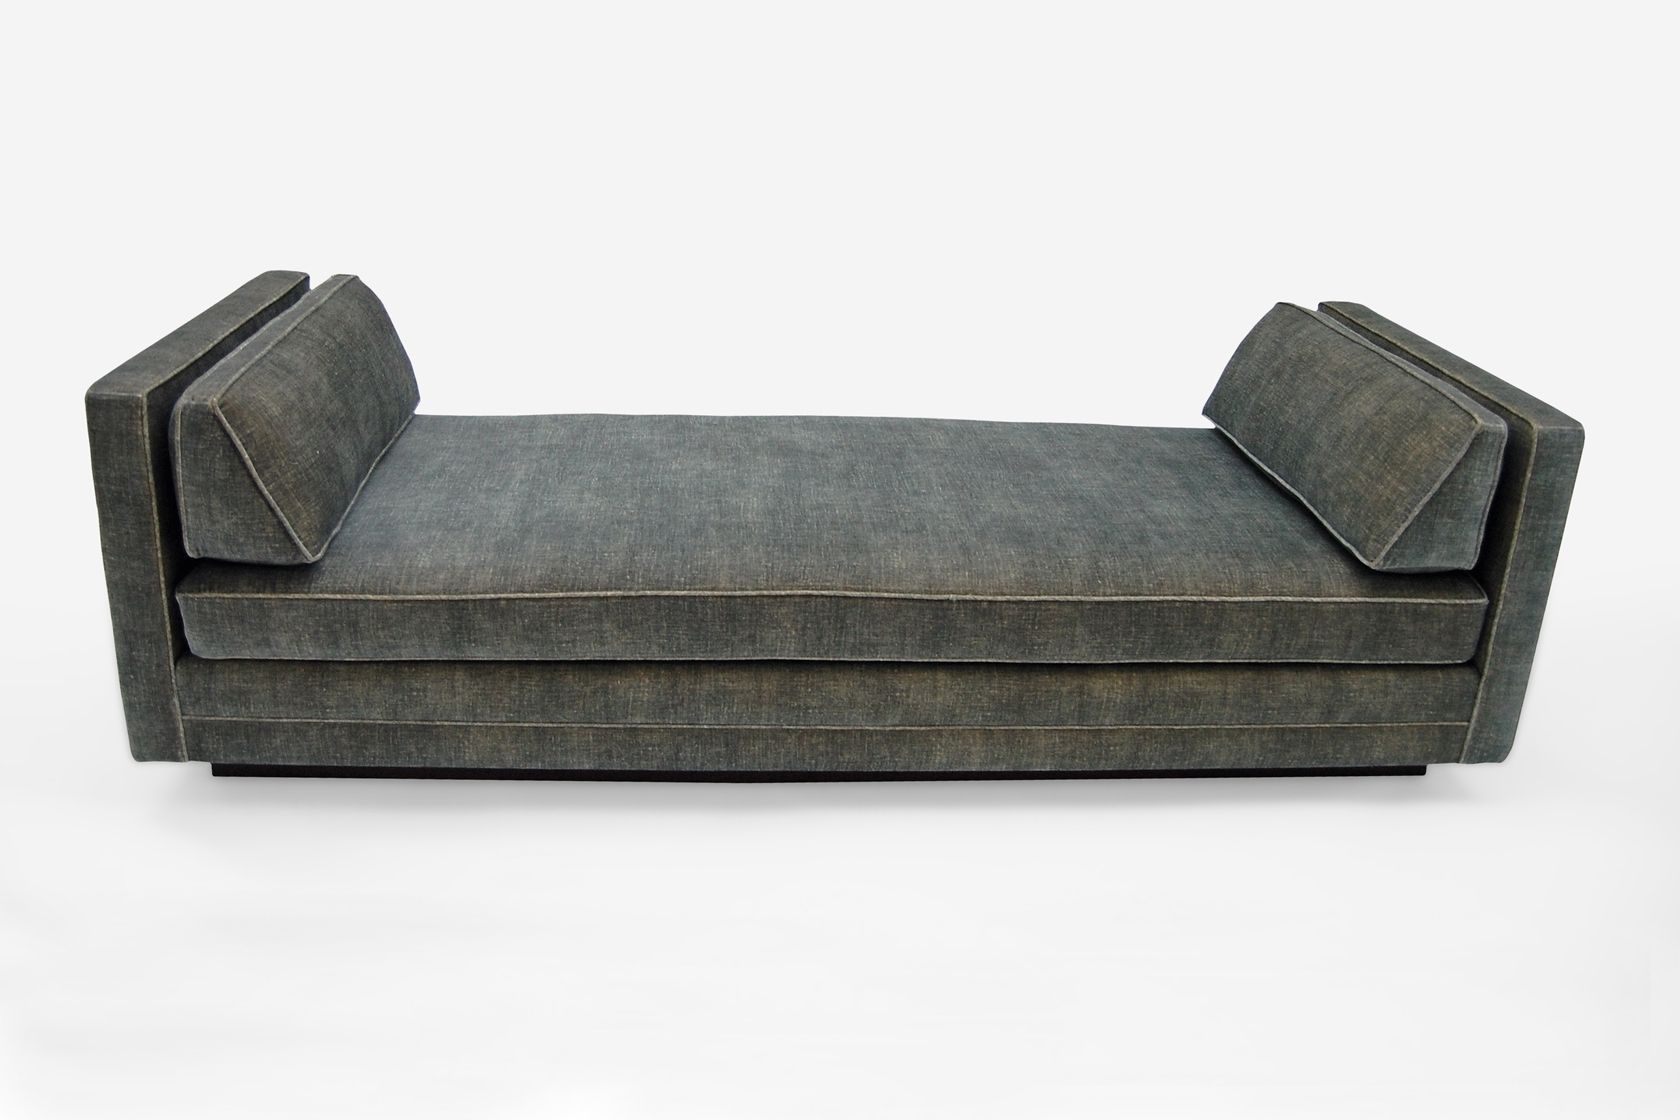 Nod Hill Chaise – Room Throughout Widely Used Chaises With Storage (View 8 of 15)